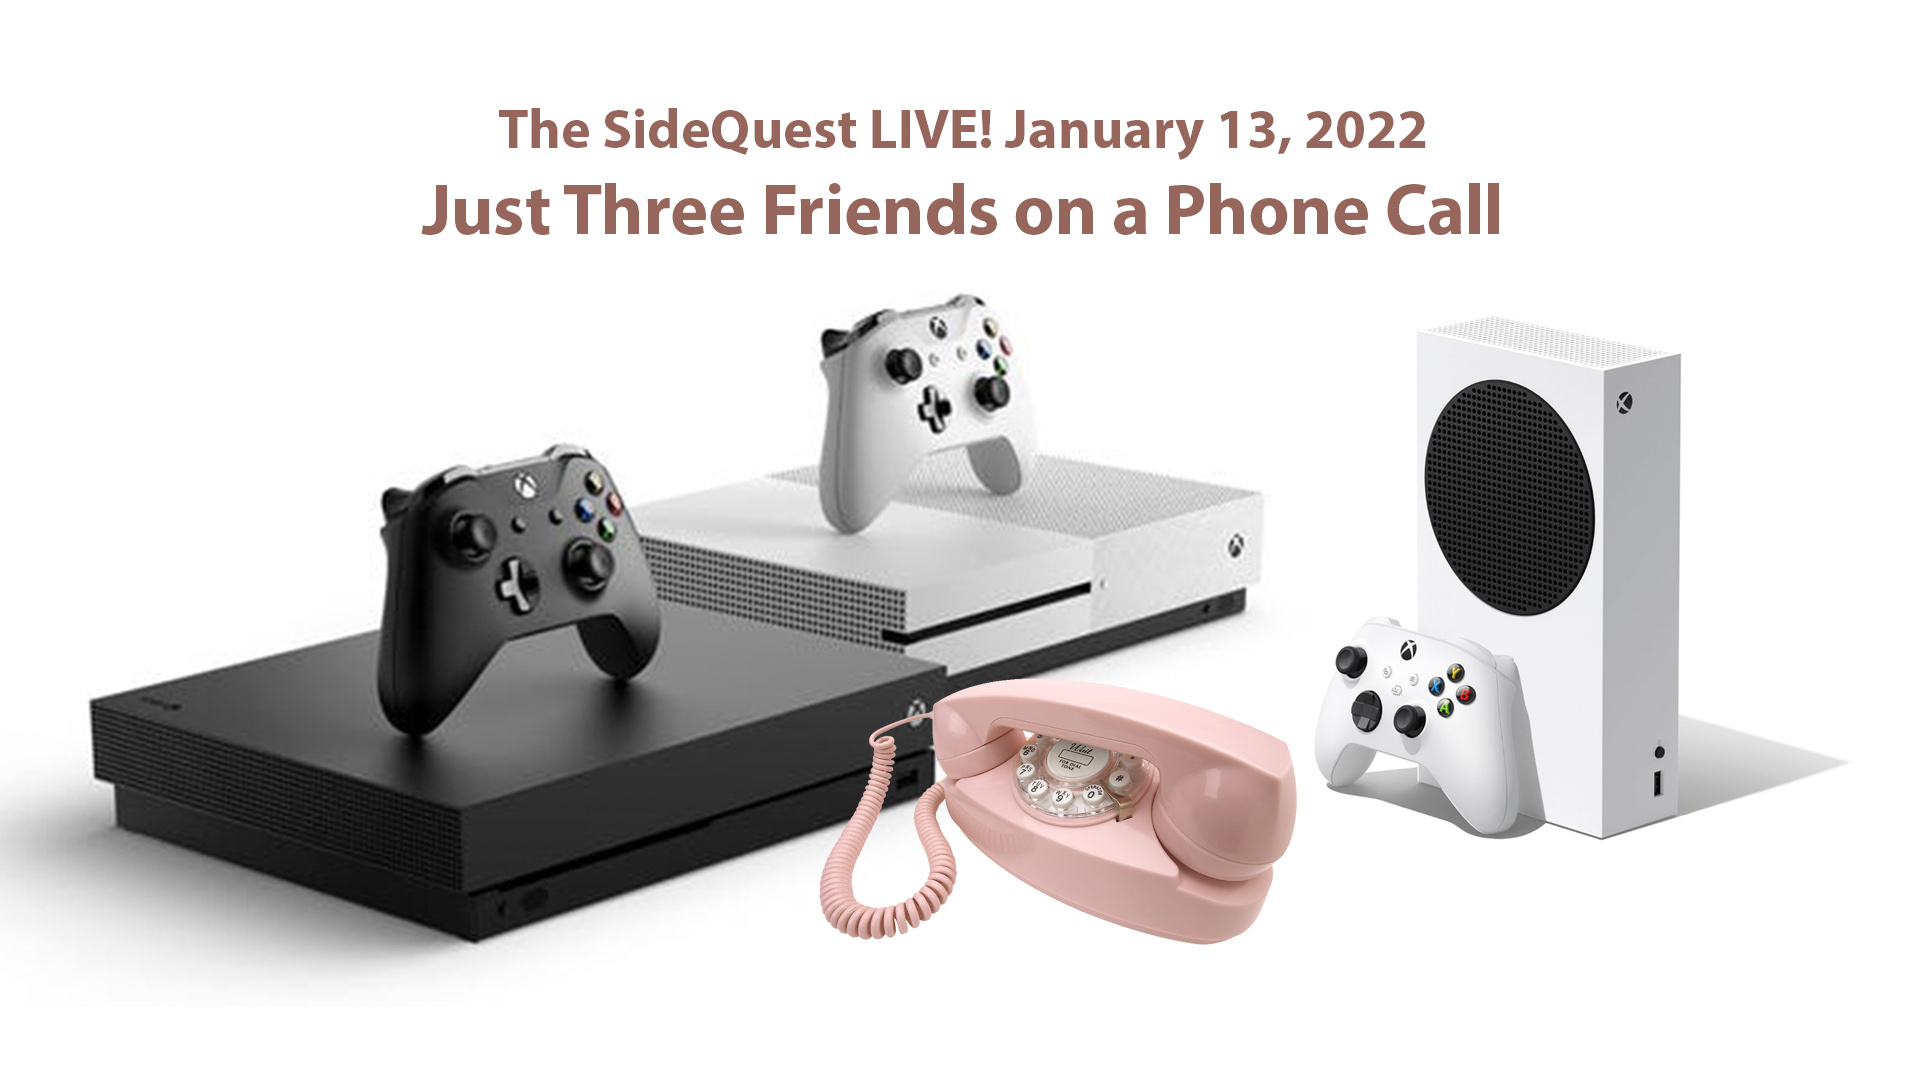 The SideQuest LIVE! January 13, 2022: Just Three Friends on a Phone Call